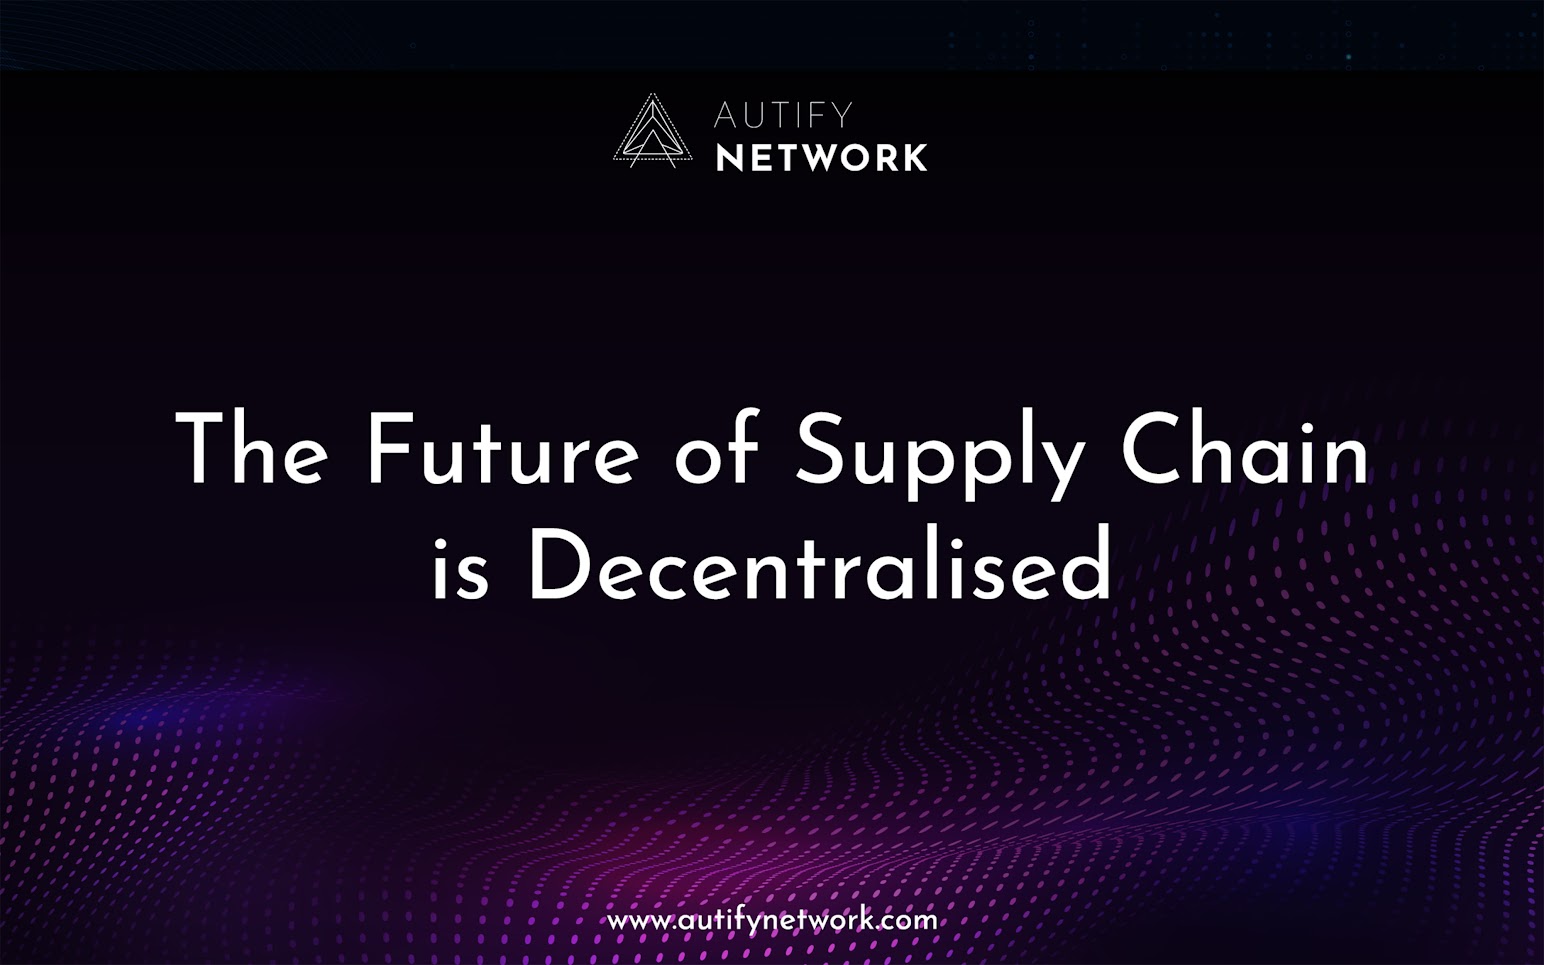 Autify Network Accelerates Towards Major Product Launches, Mainnet Preparation, and $AUTY Token Introduction